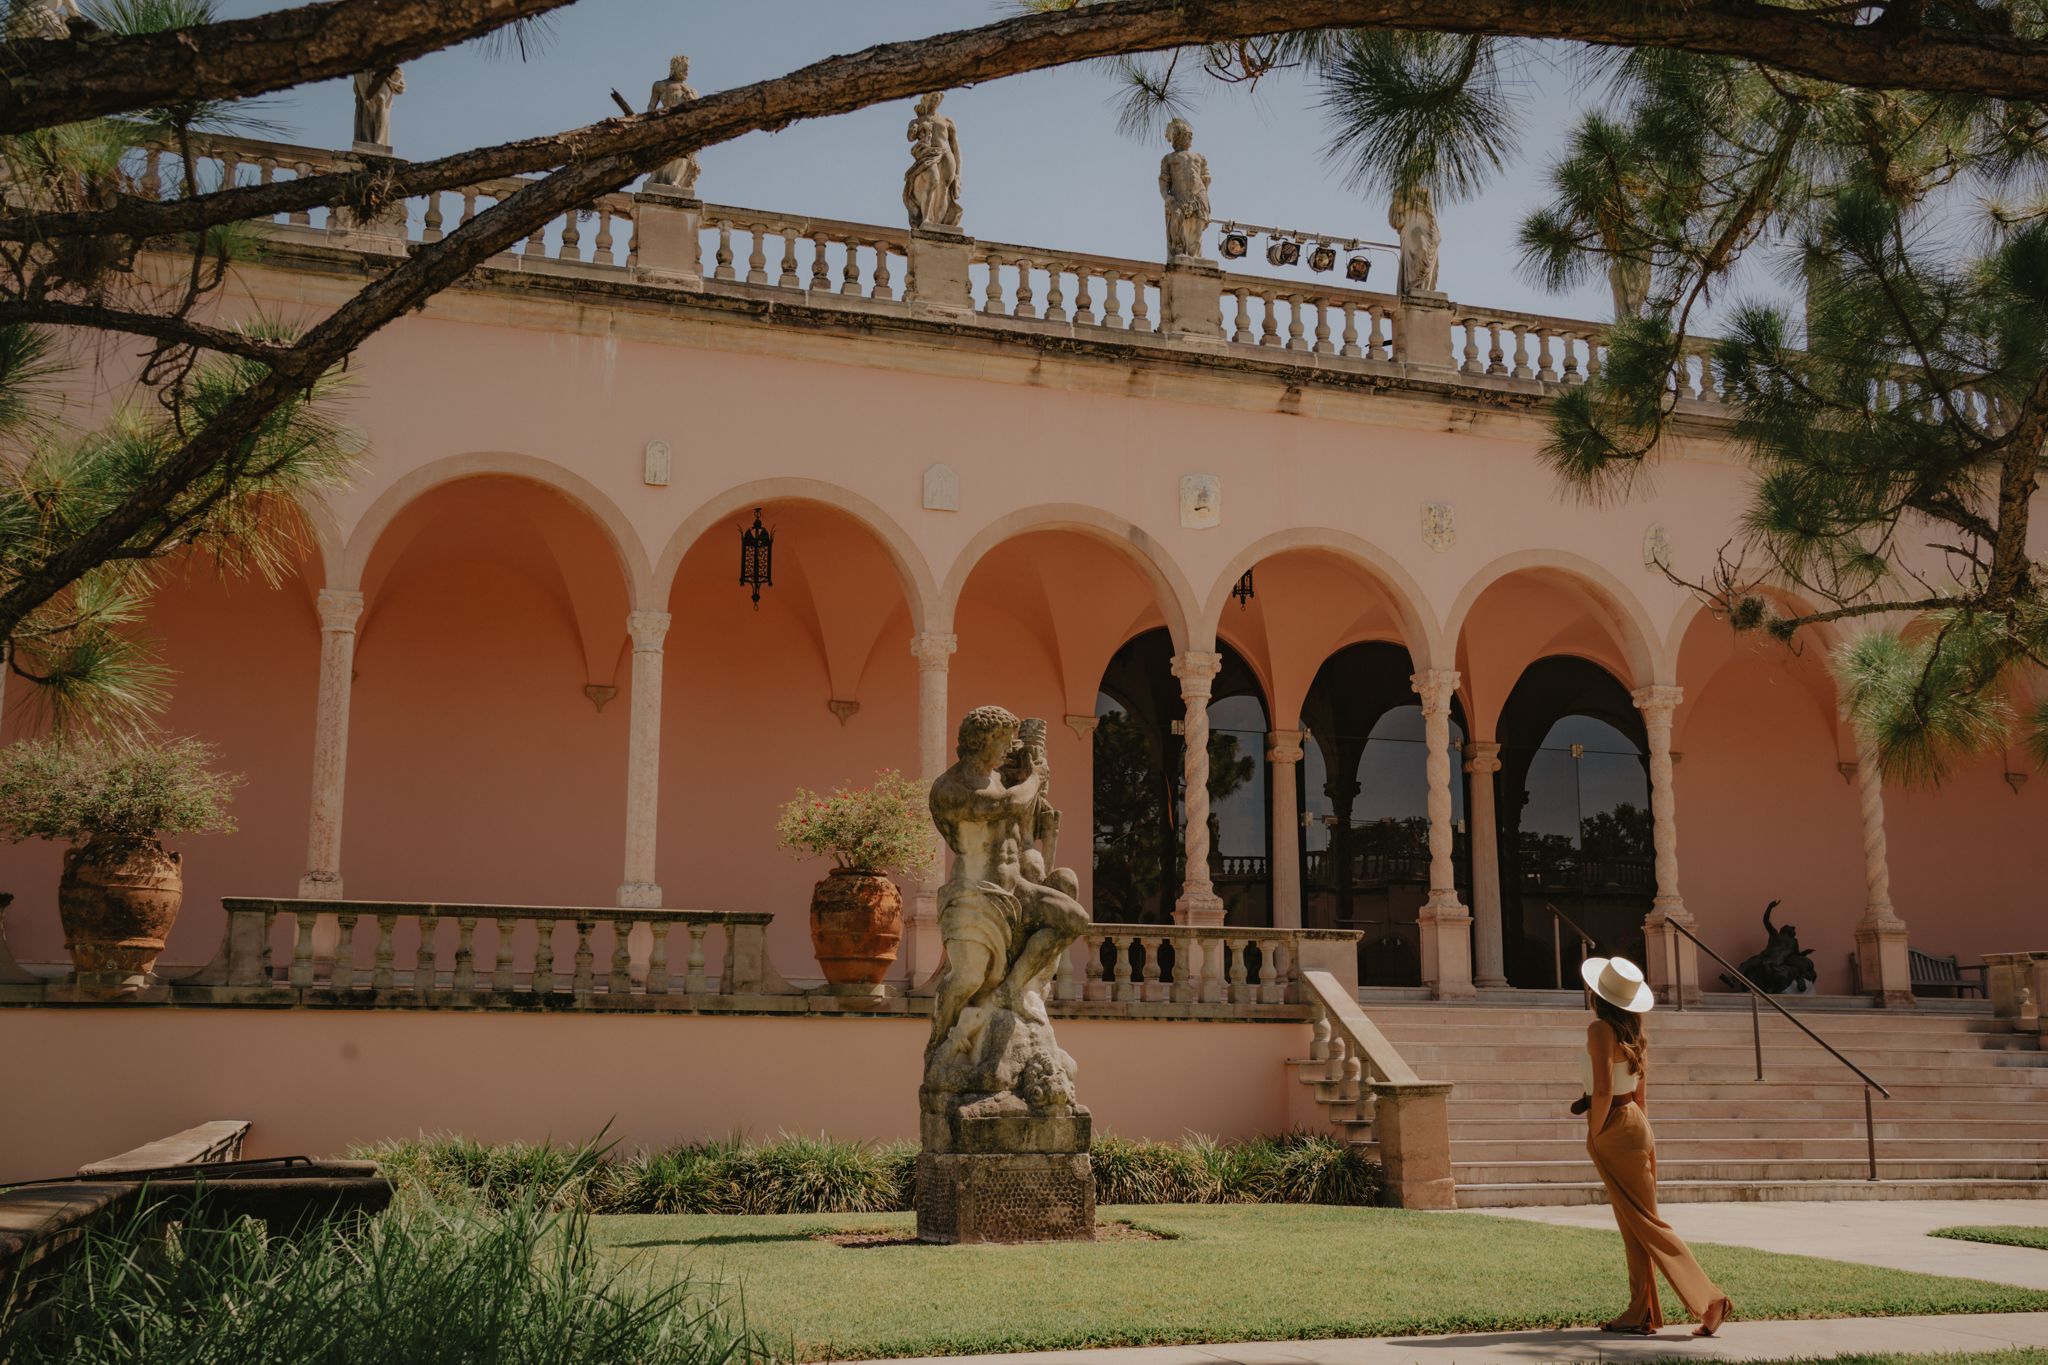 The RIngling grounds